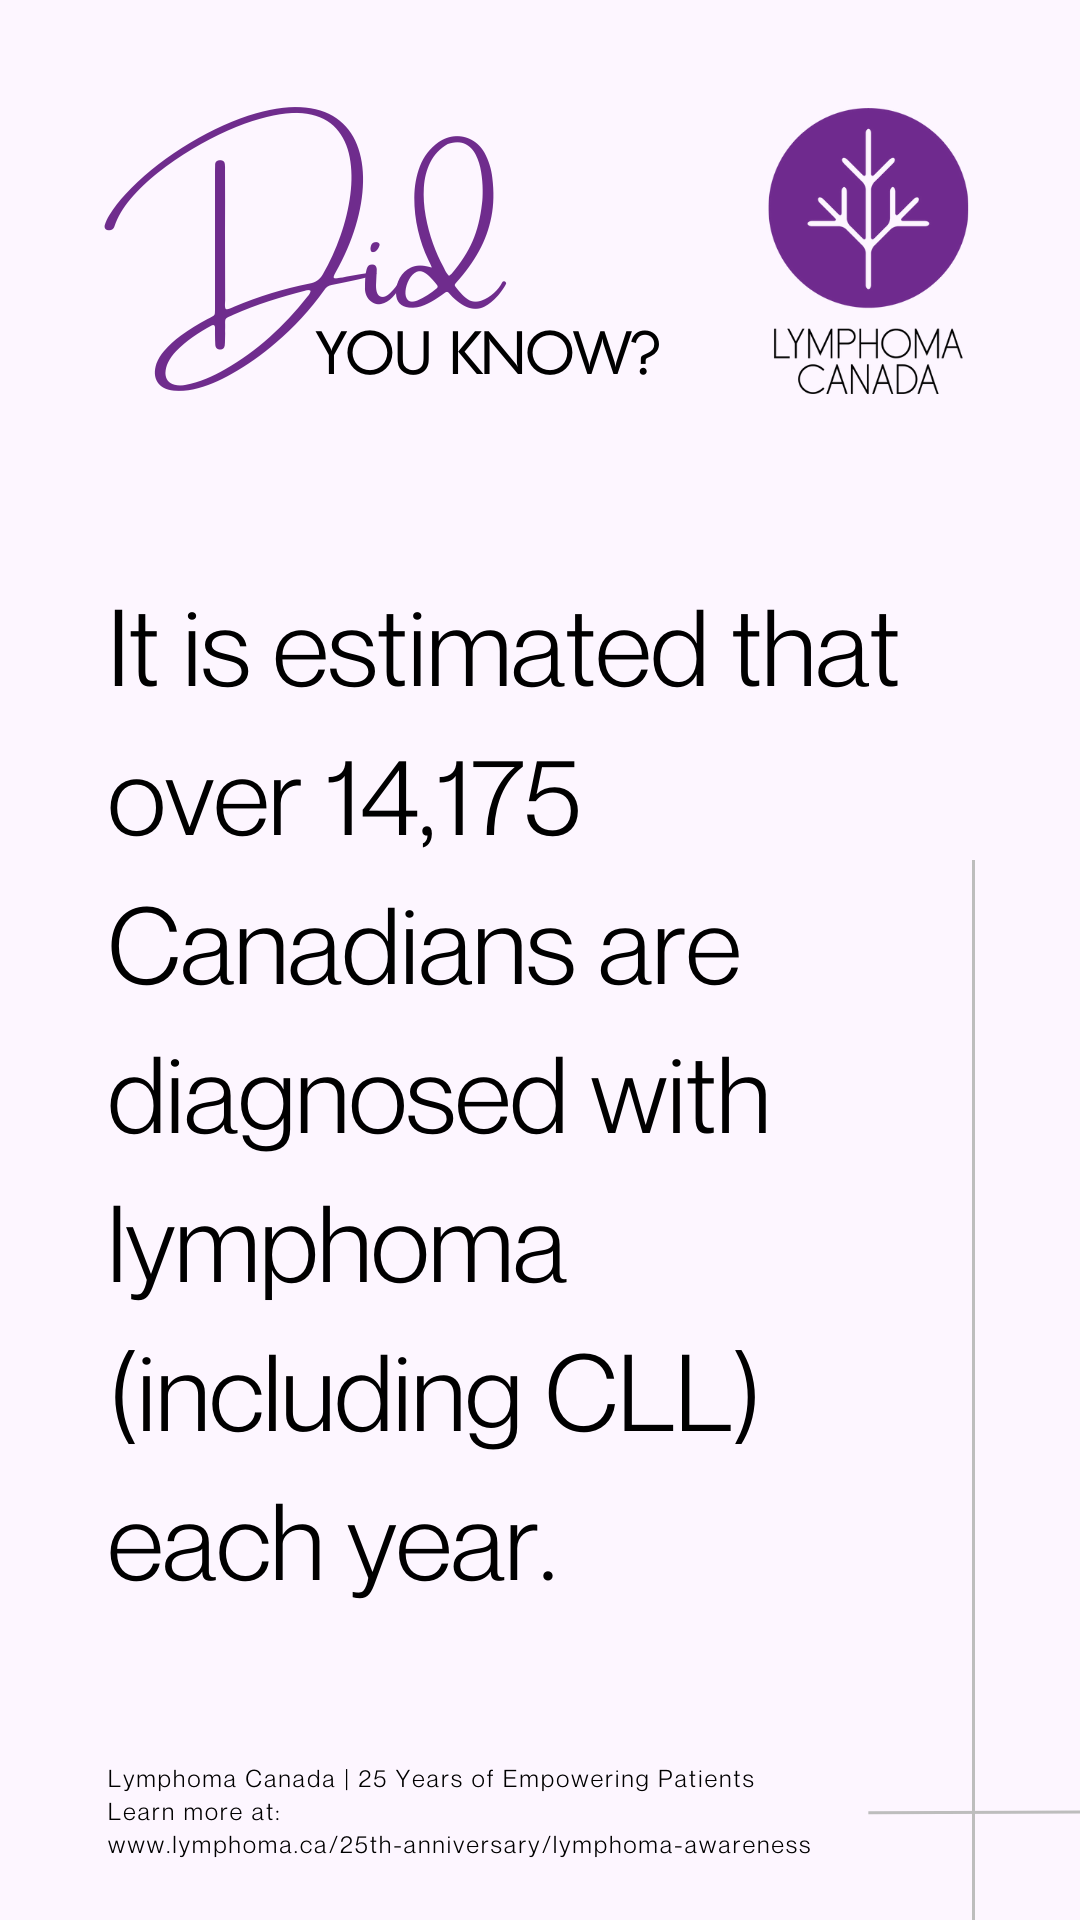 Story Infographic - Over 14,175 Canadians are diagnosed with lymphoma (including CLL) each year